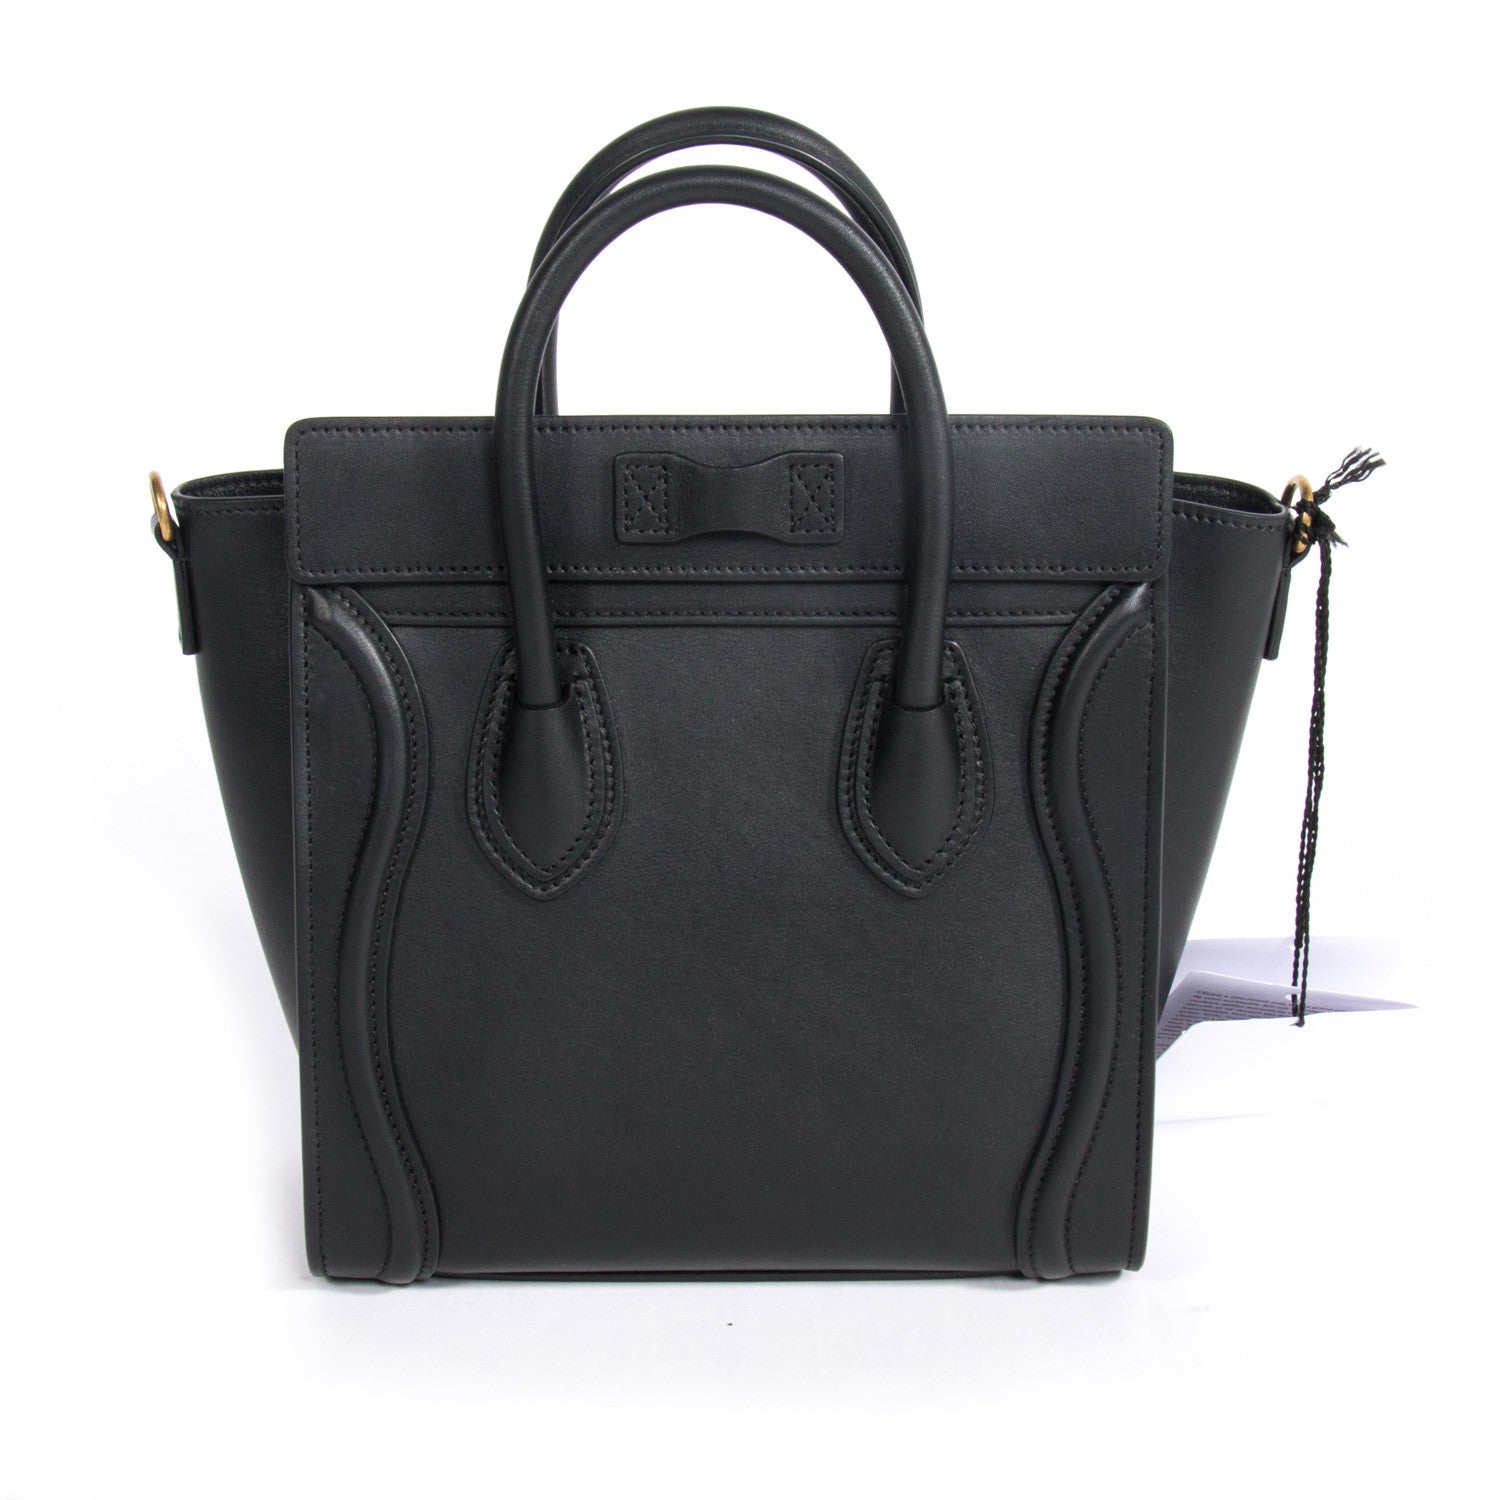 Shop authentic Celine Nano Luggage Tote at revogue for just USD 2,200.00